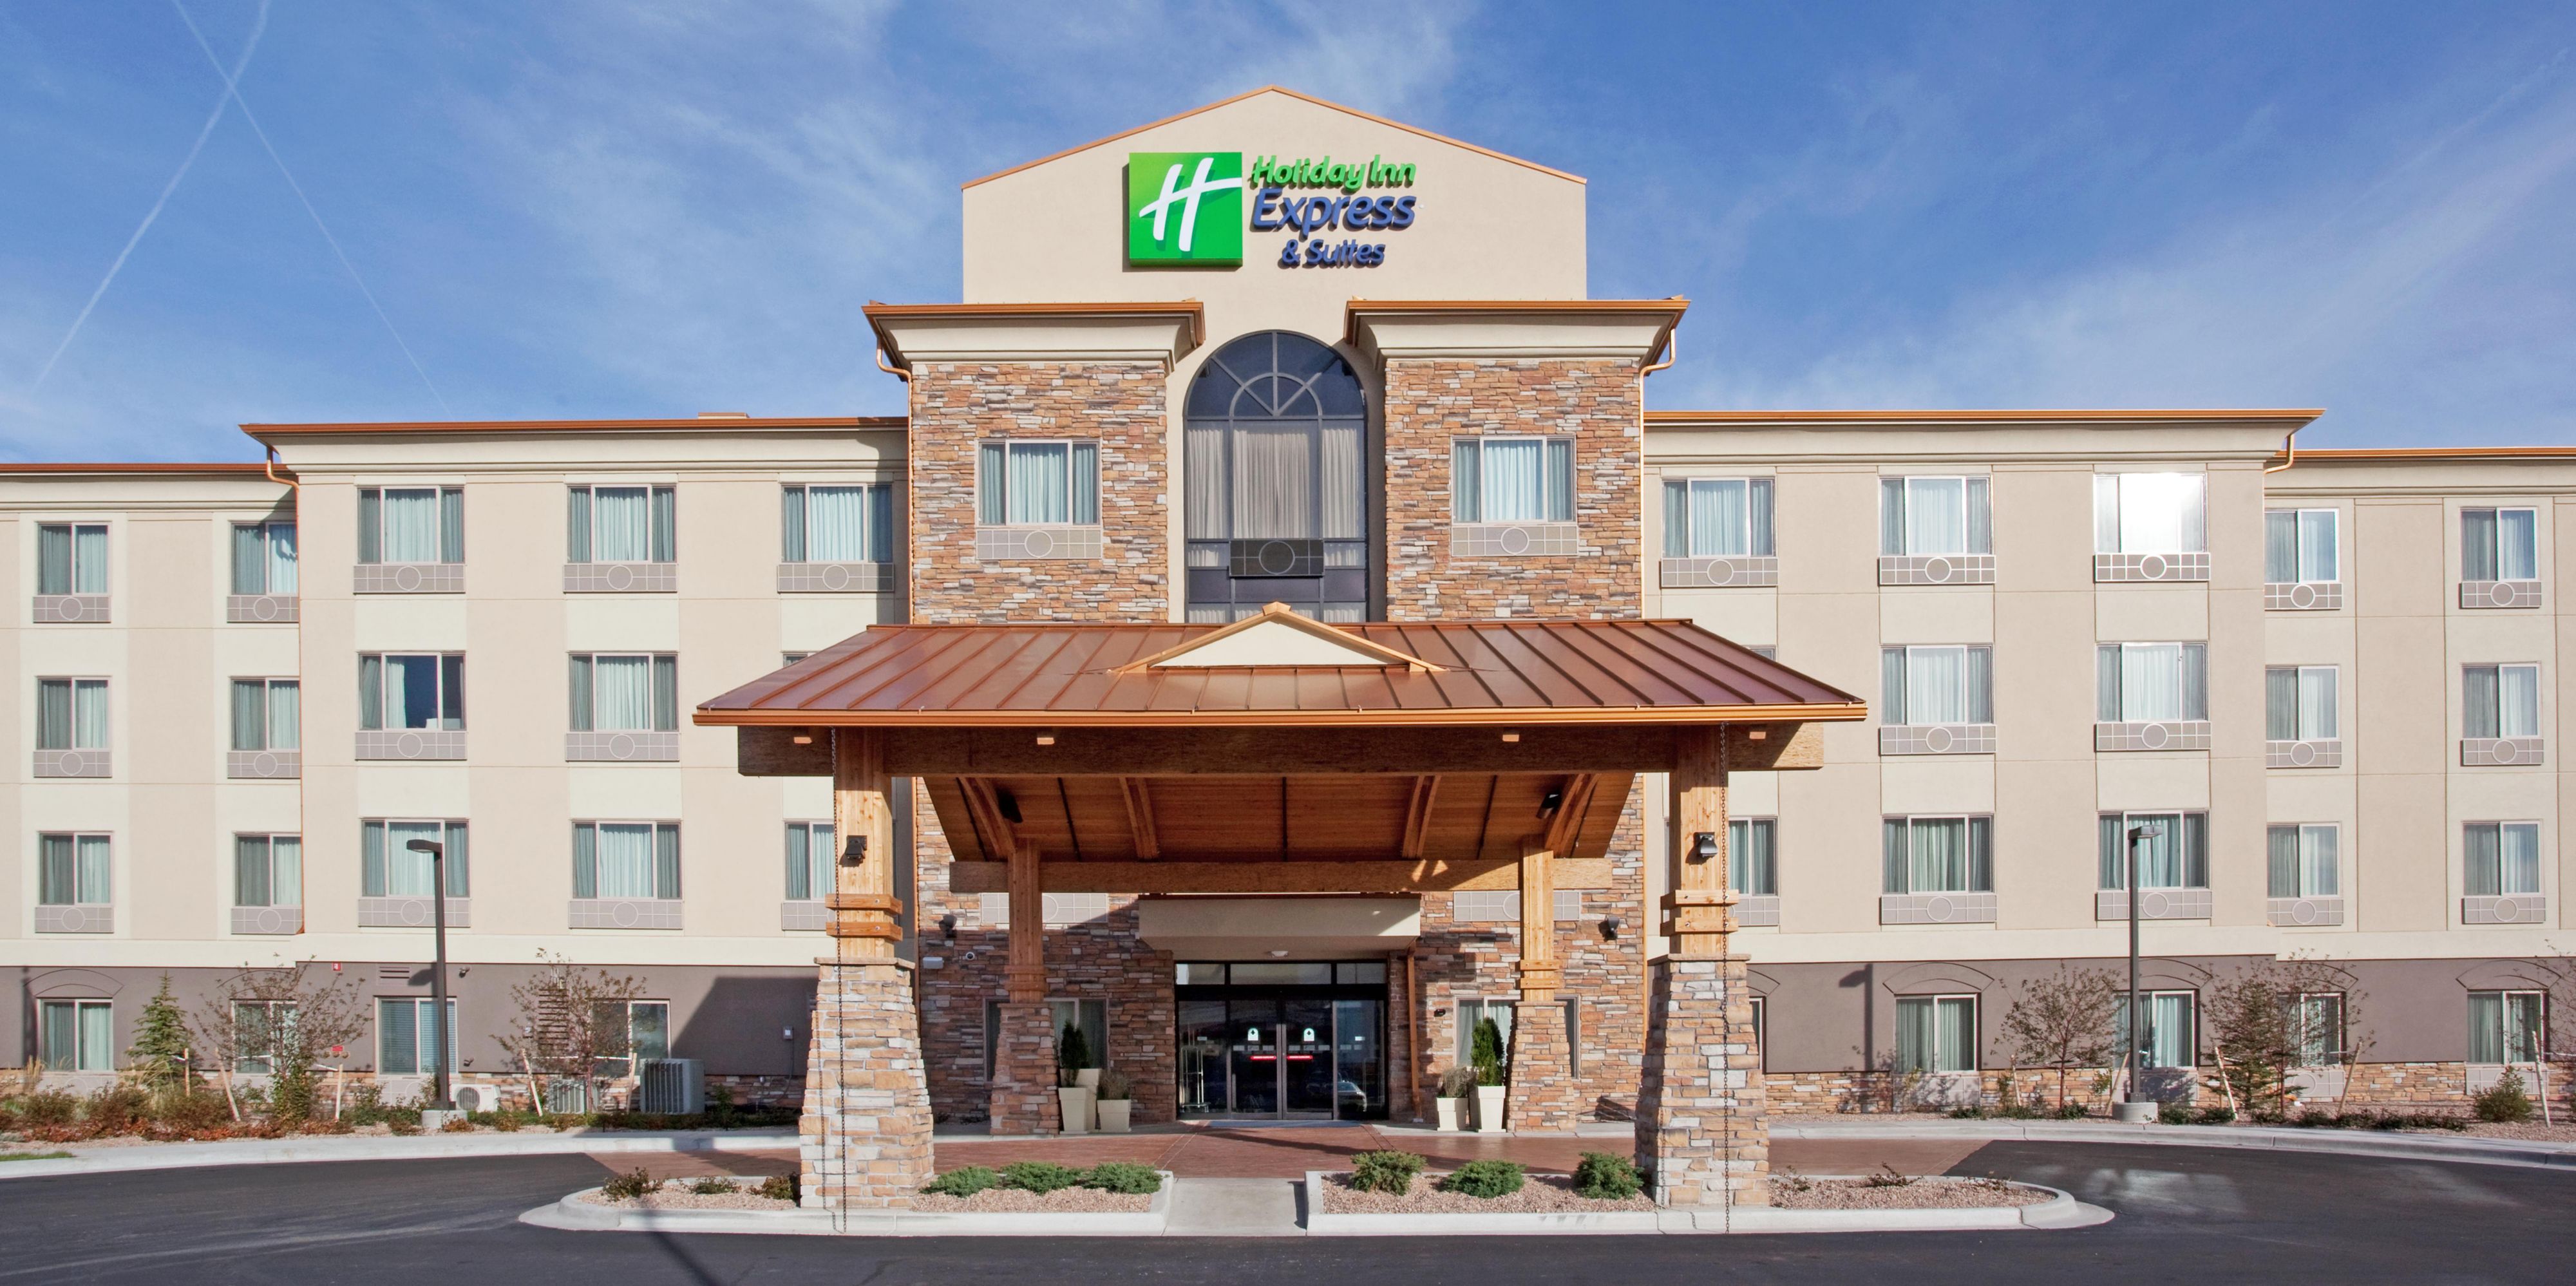 Holiday Inn Express And Suites Denver 4184228462 2x1